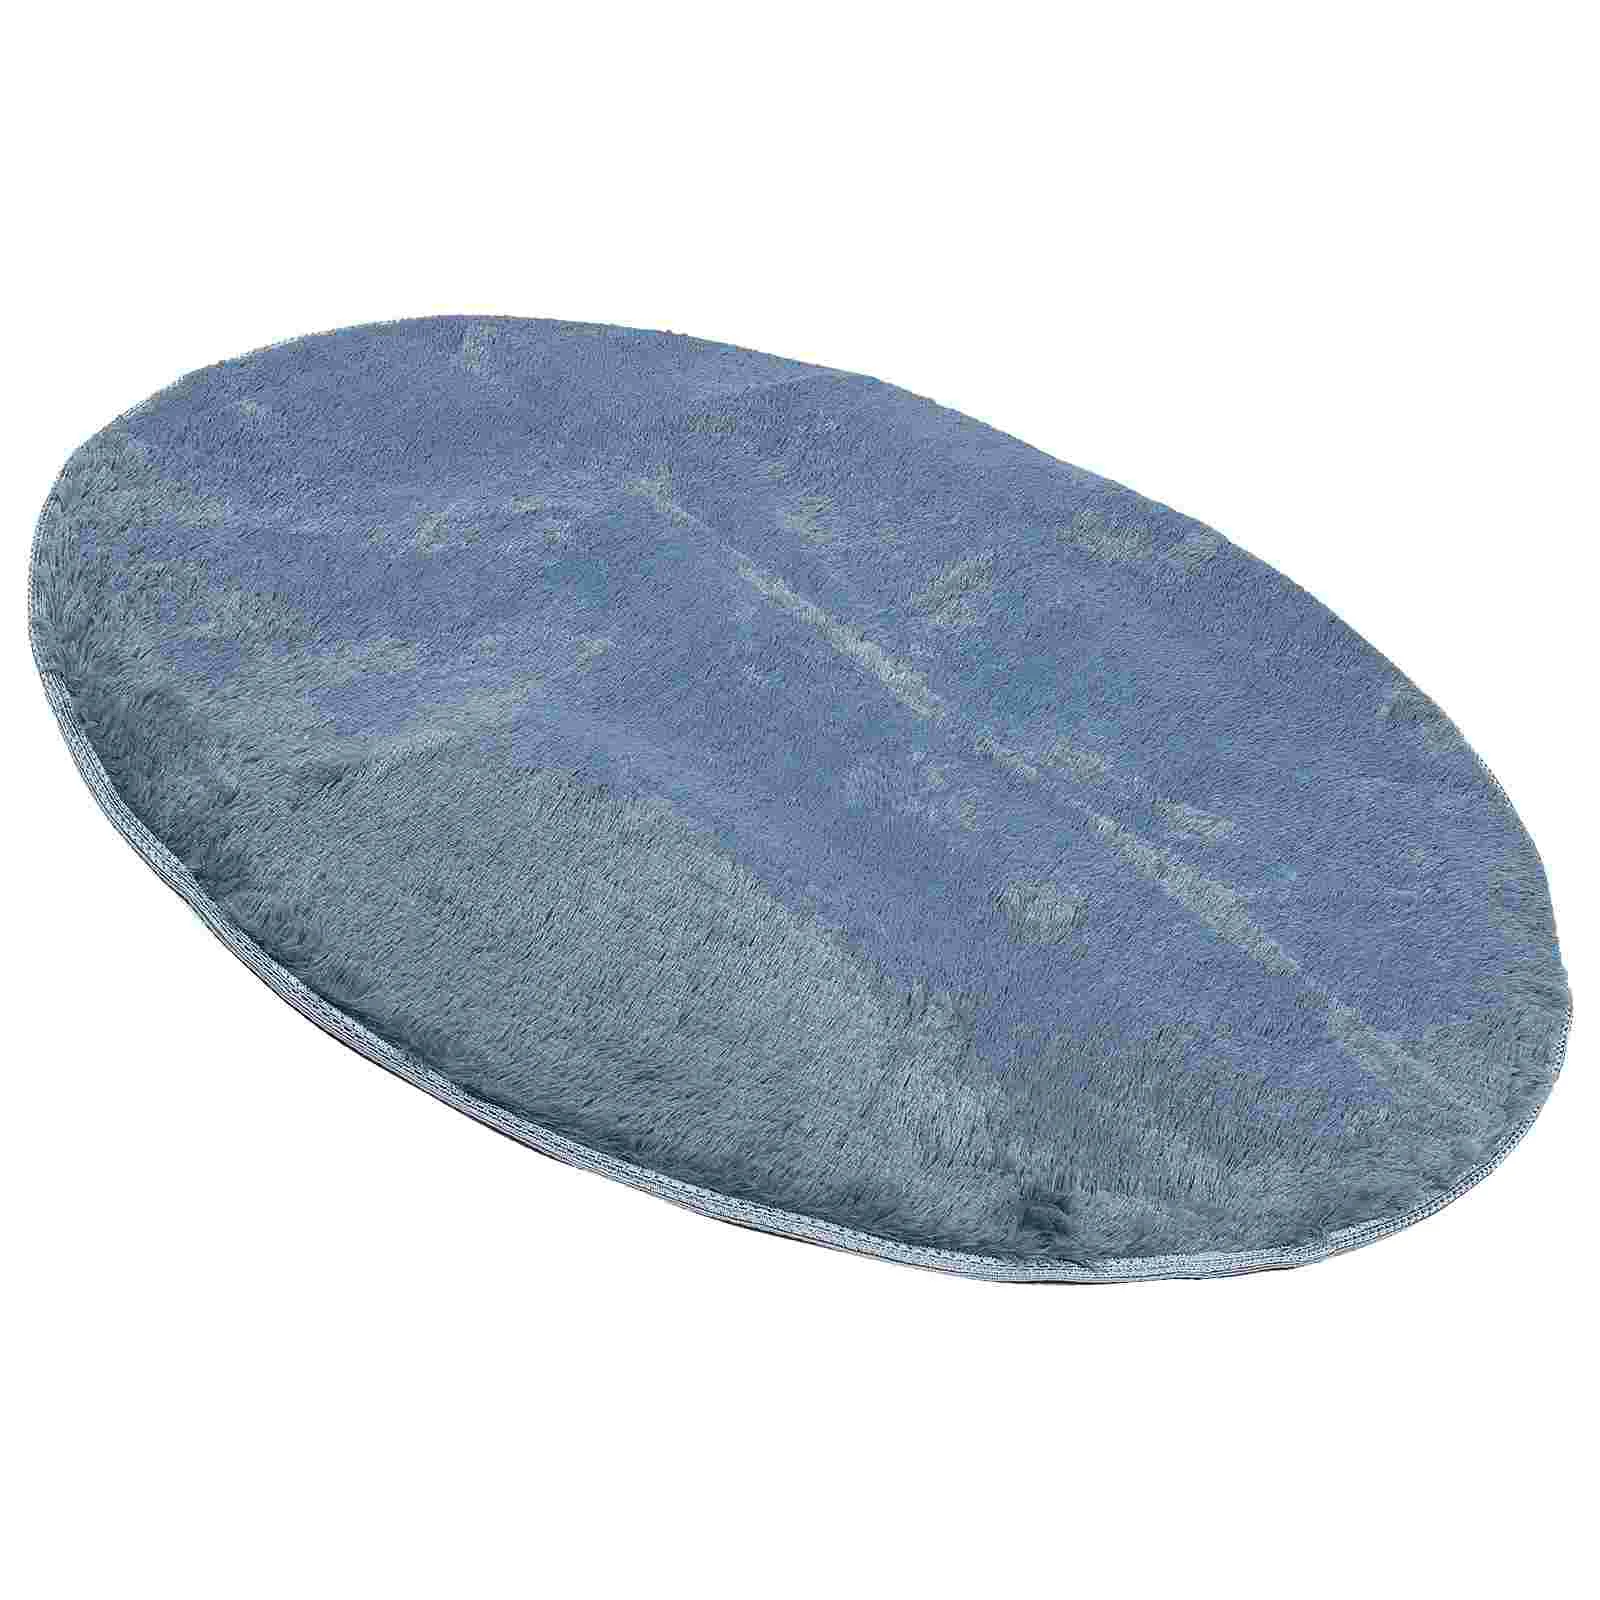 

Drum Rug Mat Sound Pad Floor Noise Carpet Skid Anti Cushion Isolation Absorbing Soundproof Reduction Non Panels Area Jazz